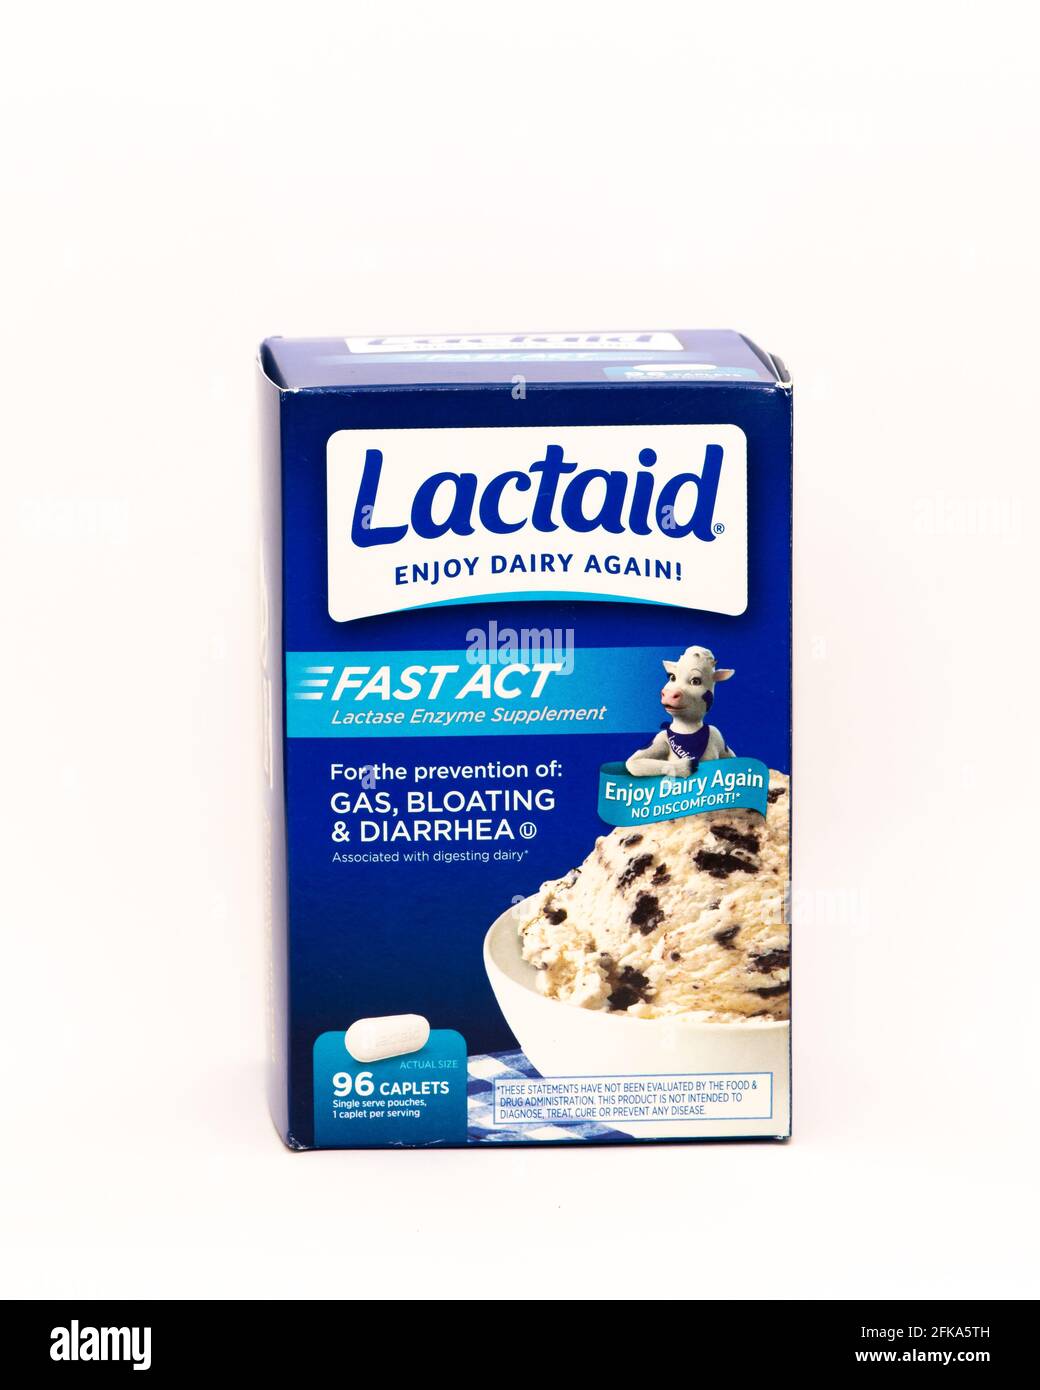 A box of Lactaid Lactase enzyme supplements for the prevention of gas, bloating and diarrhea from dairy products Stock Photo